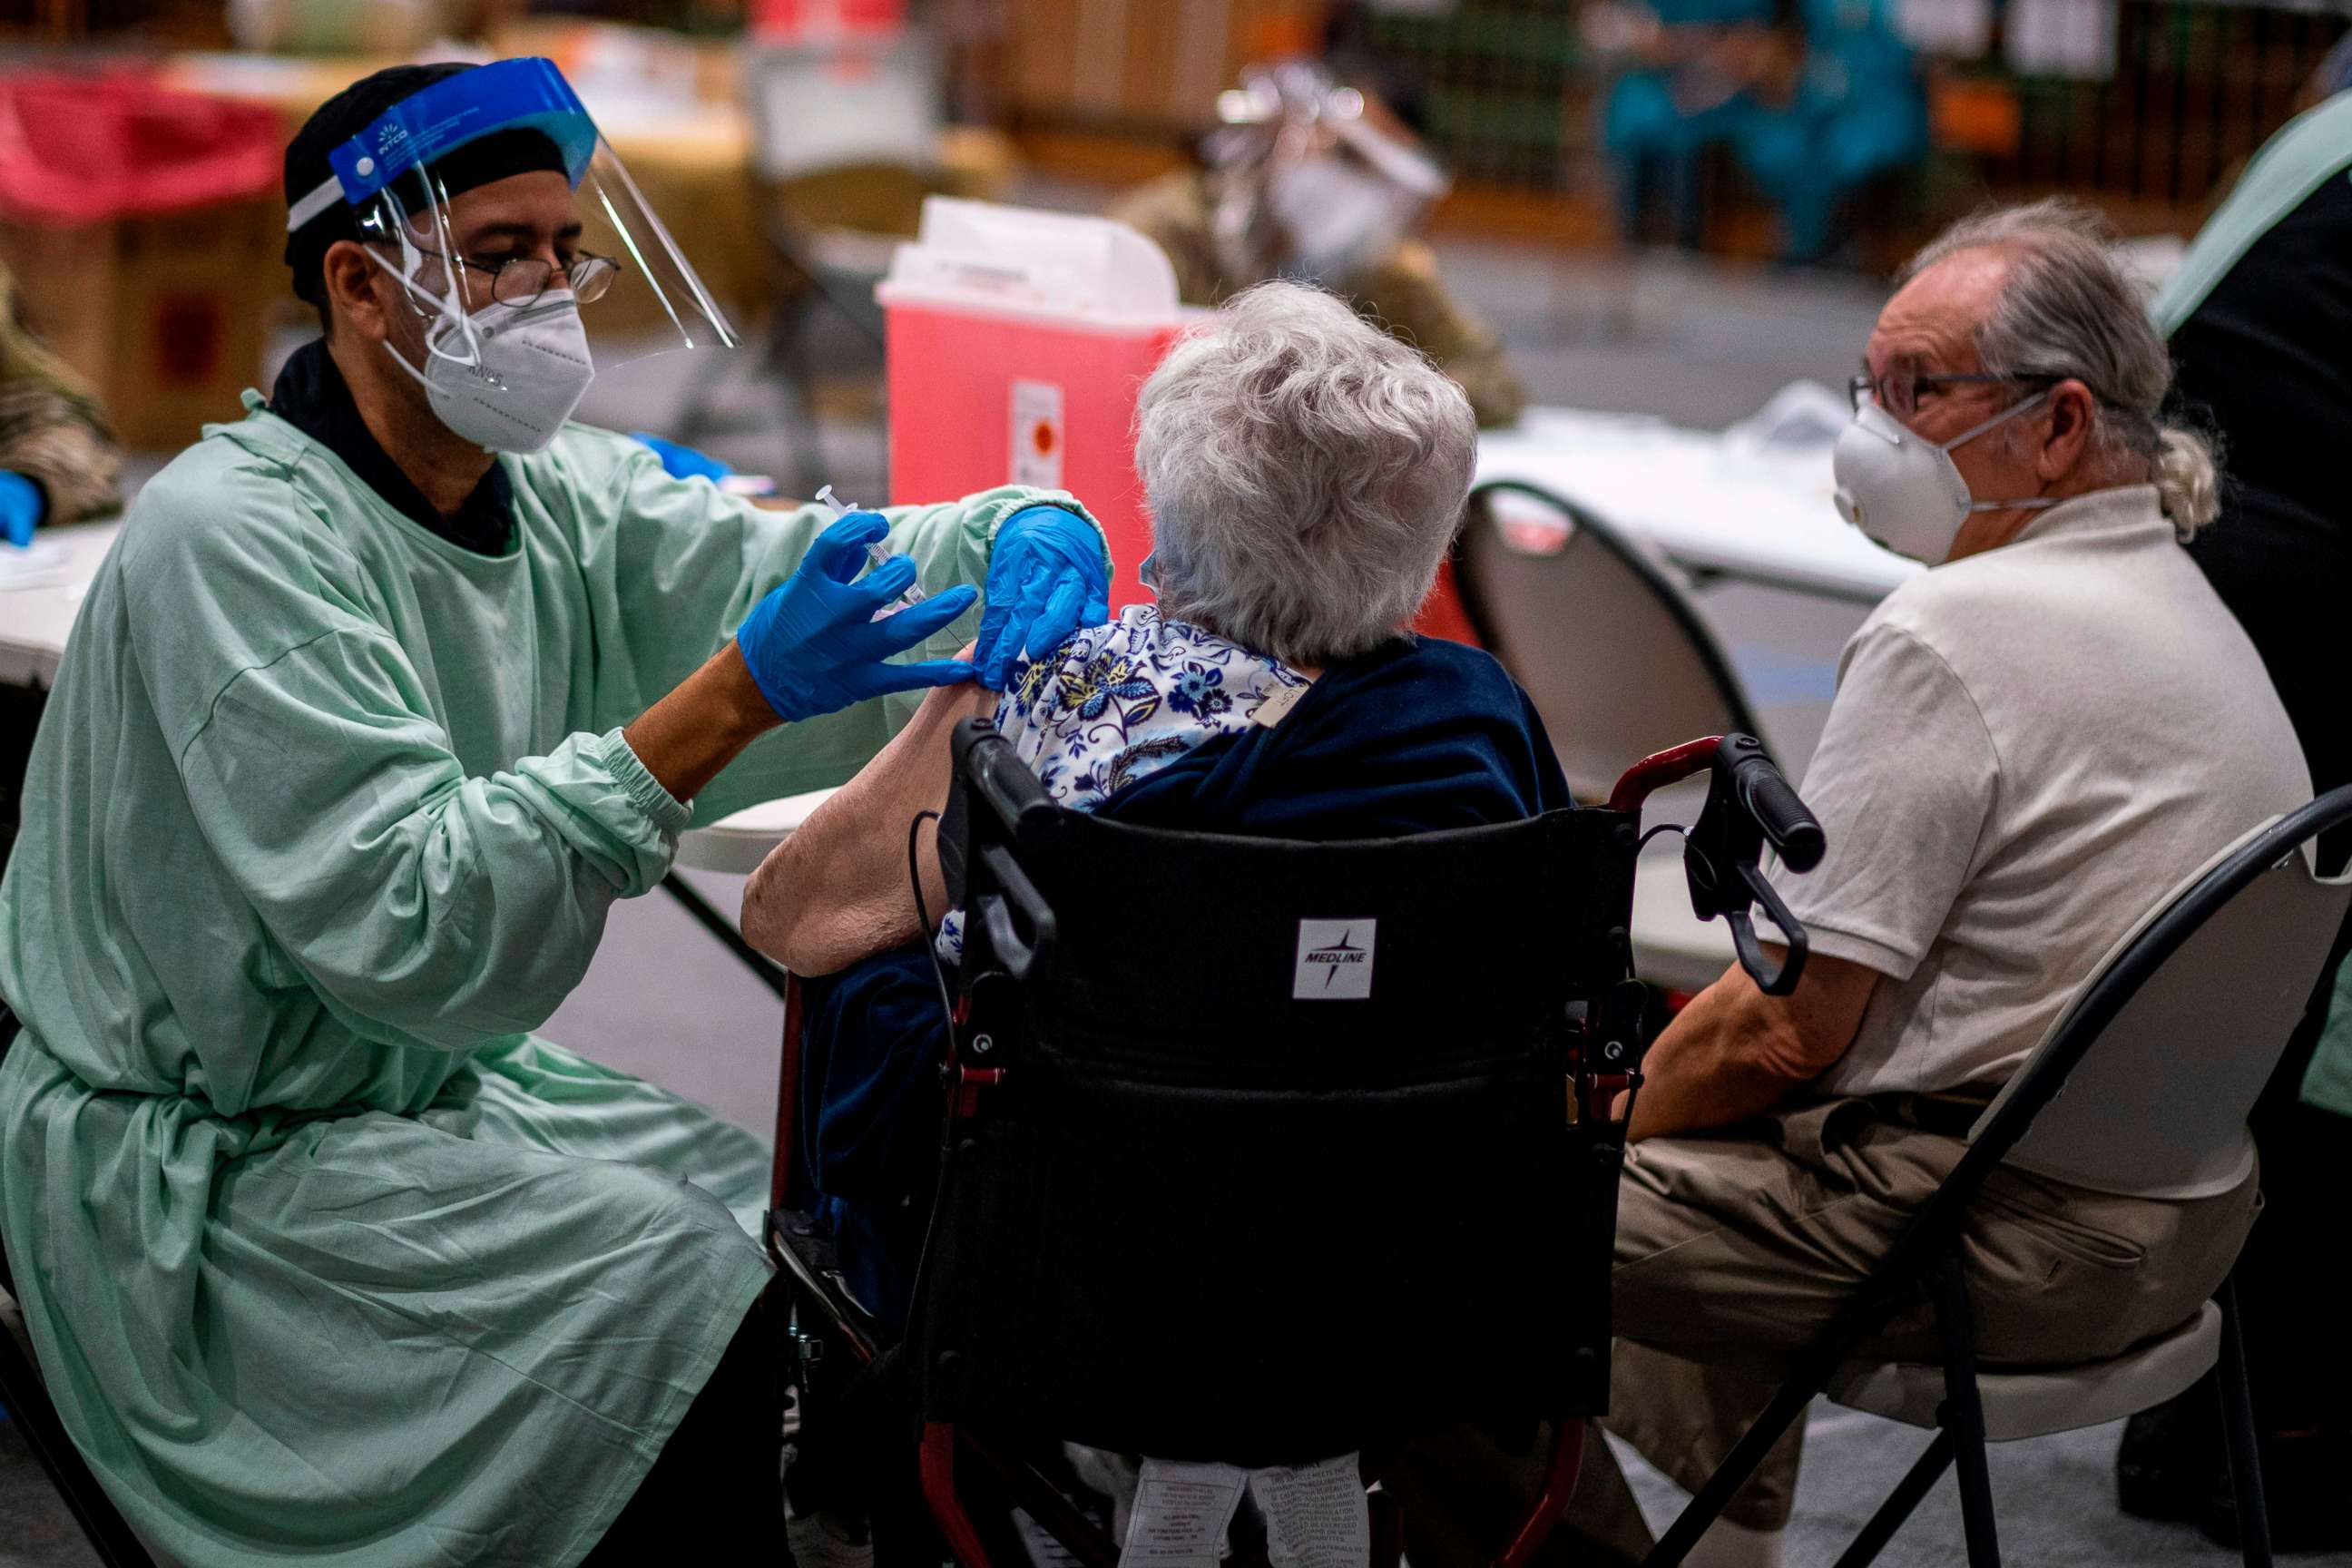 PHOTO: A health worker gives a shot of the Moderna vaccine at a Puerto Rico National Guard vaccination center during a priority COVID-19 vaccination program for the elderly, in San Juan, Puerto Rico on Feb. 8, 2021.